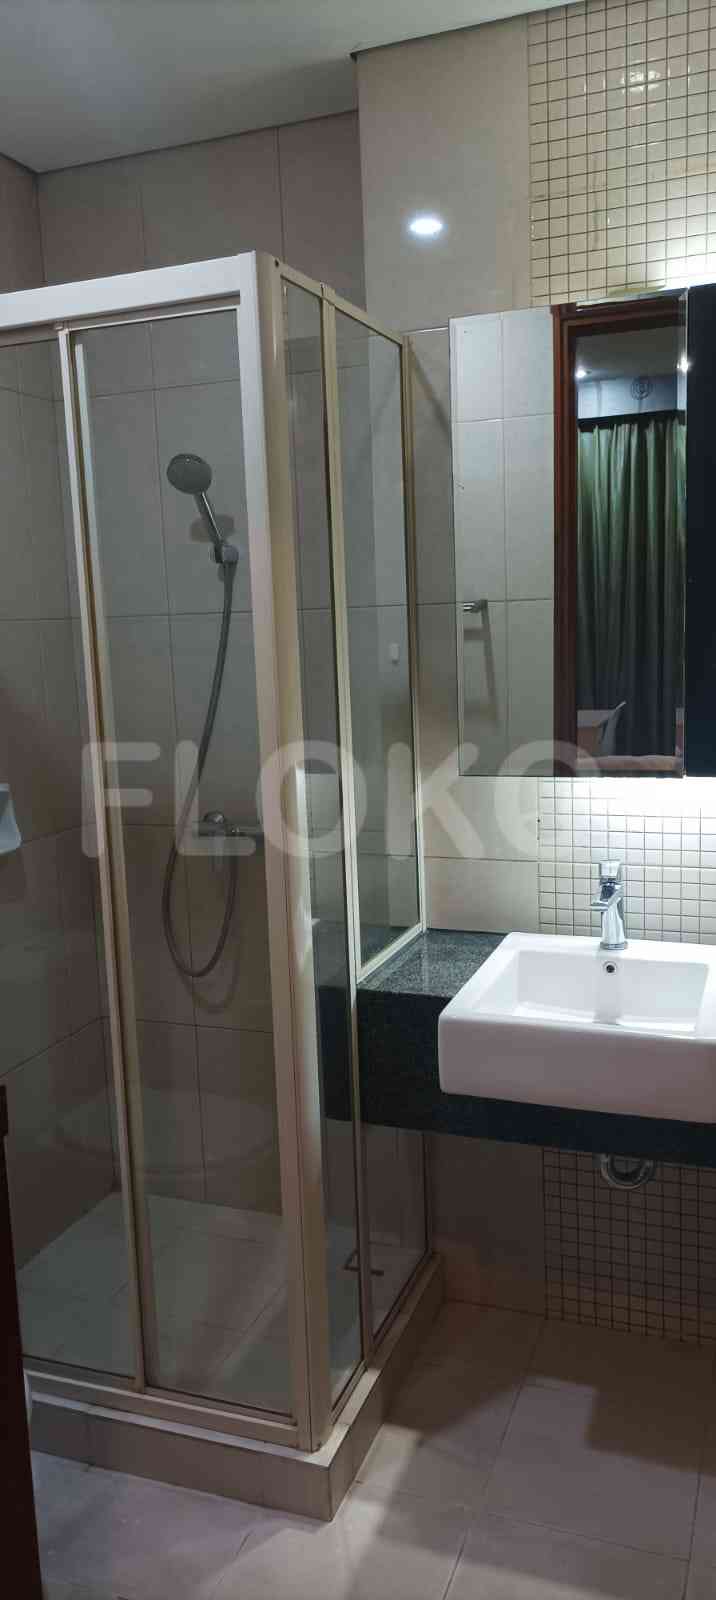 2 Bedroom on 2nd Floor for Rent in Kuningan Place Apartment - fku966 9